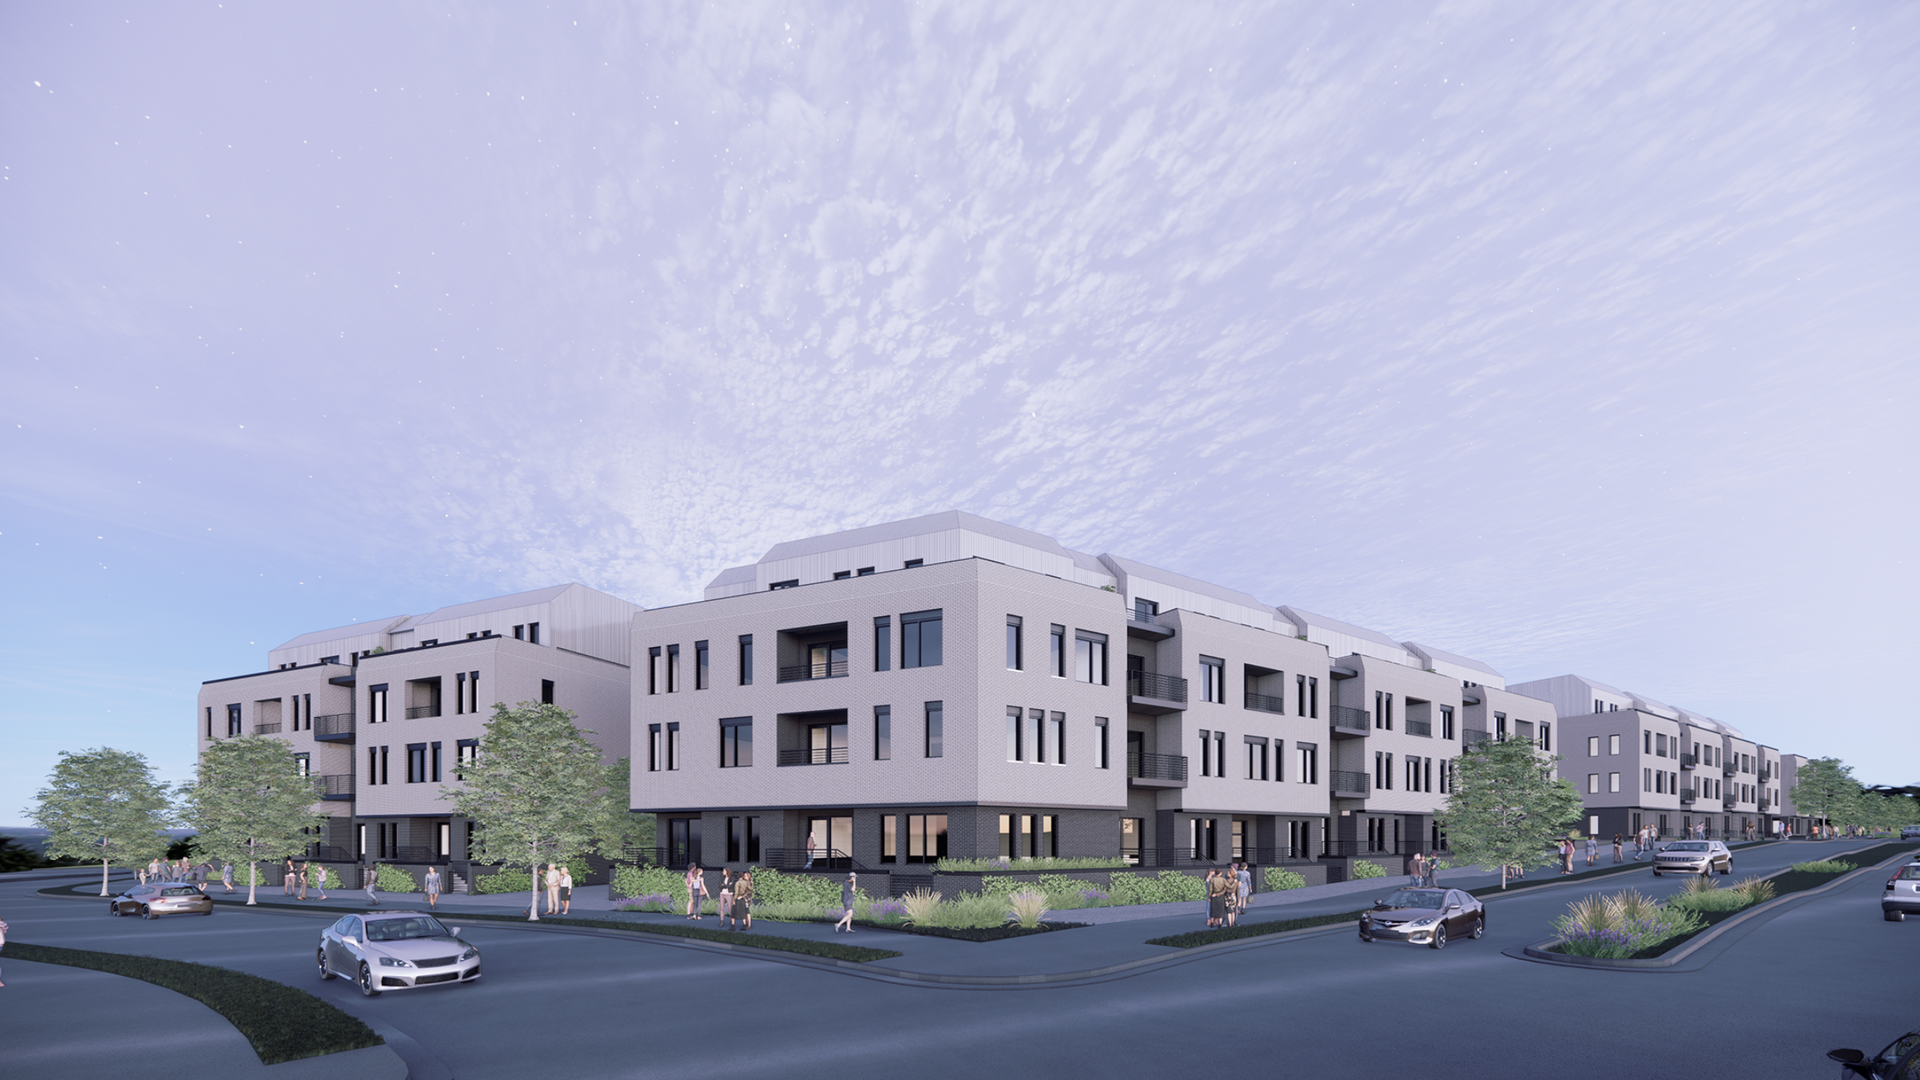 Rendering of an apartment complex